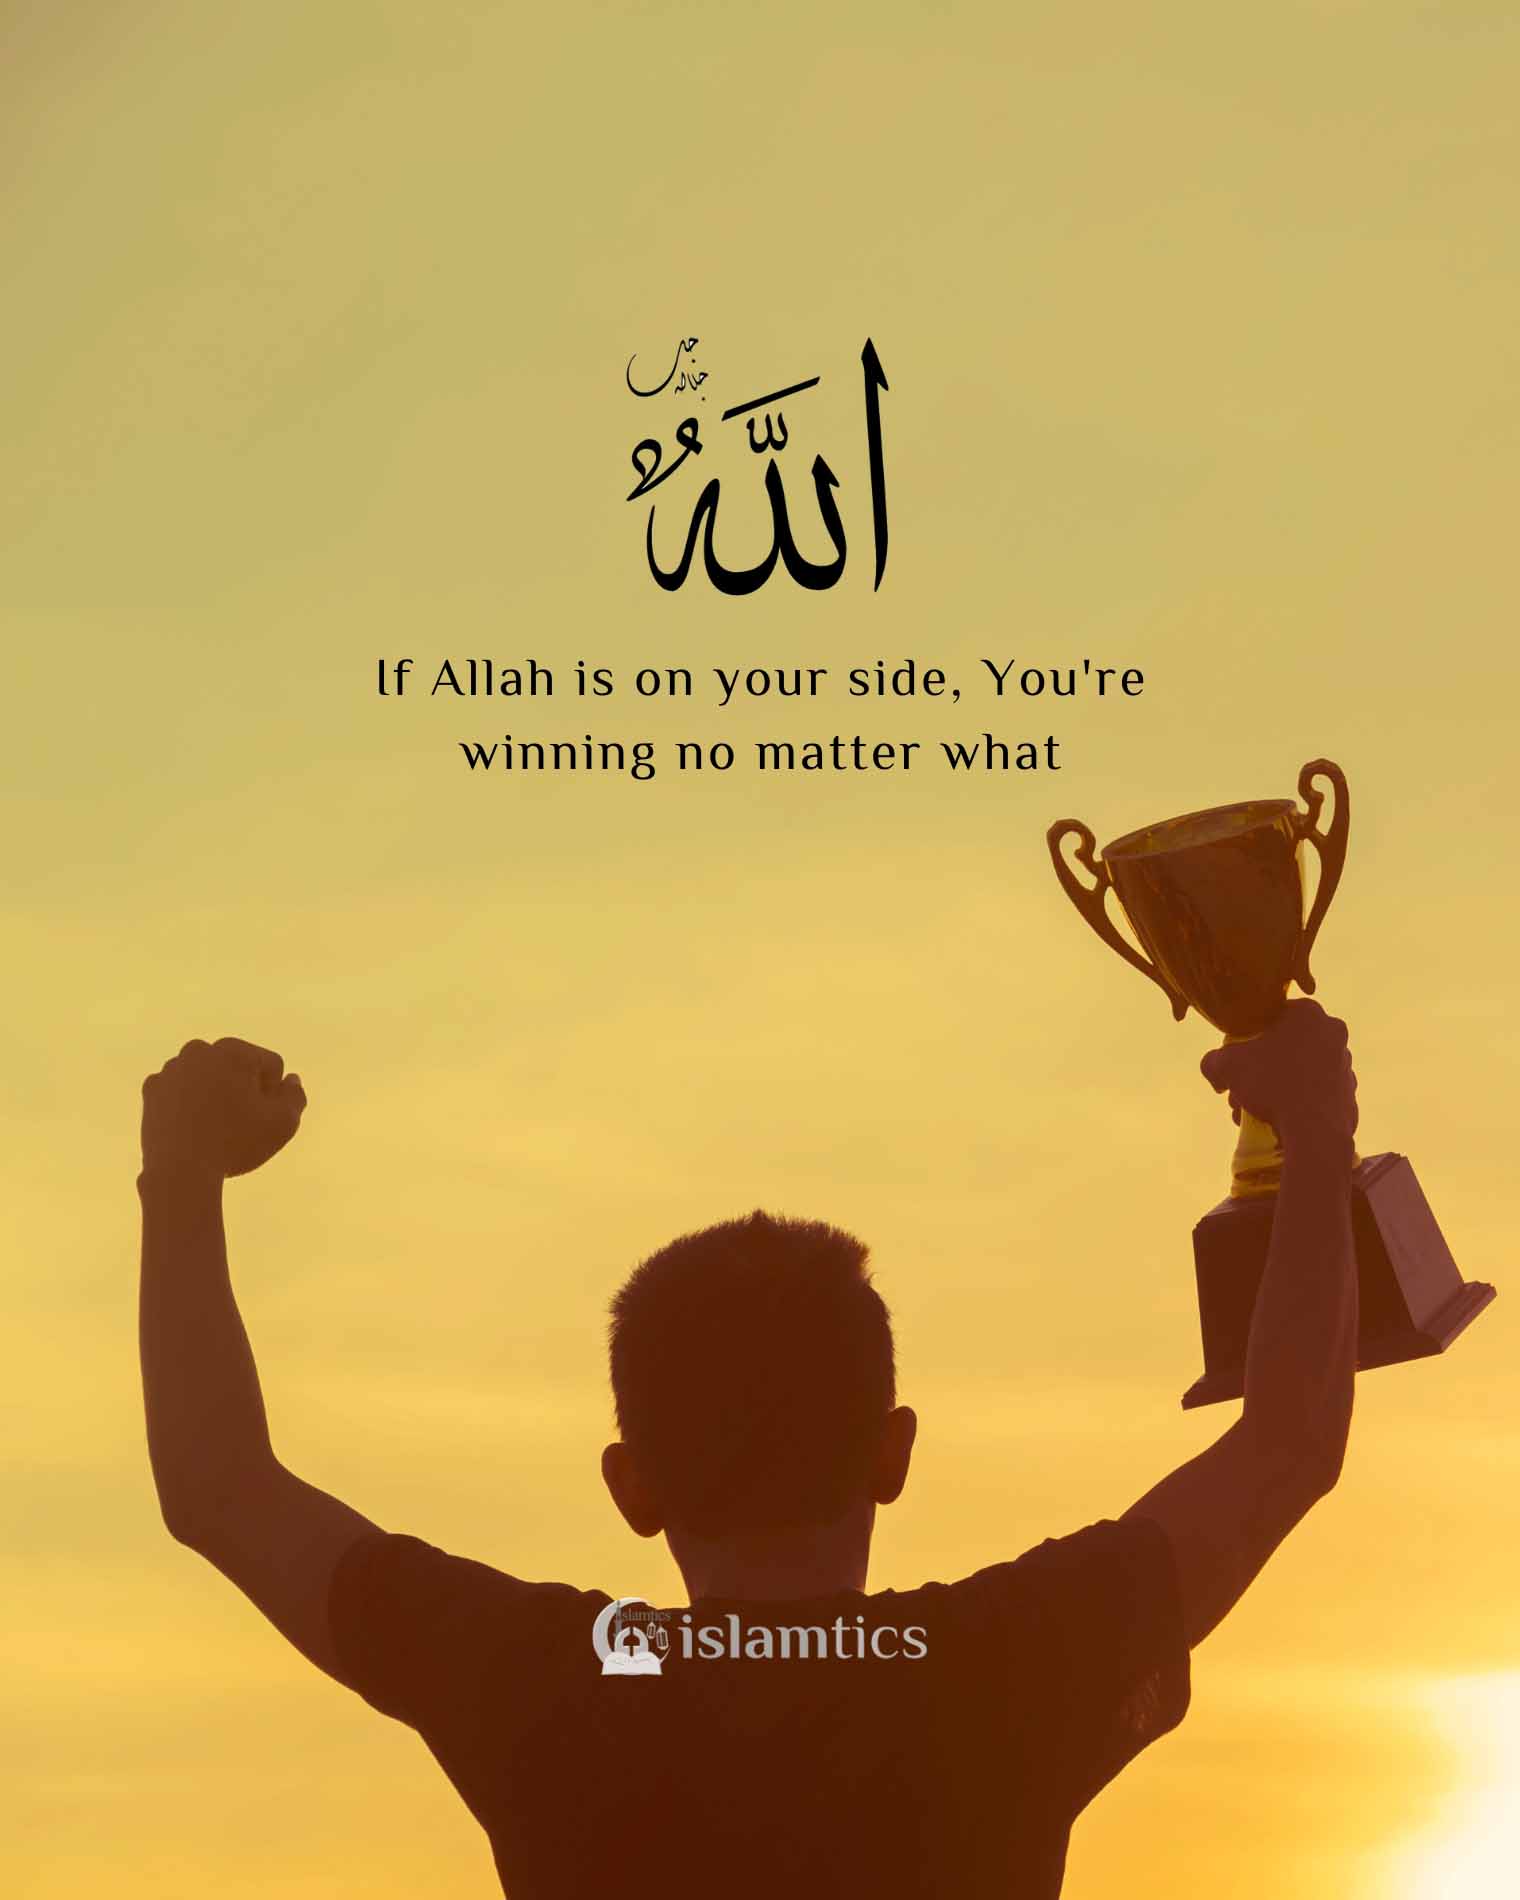 If Allah is on your side, You’re winning no matter what